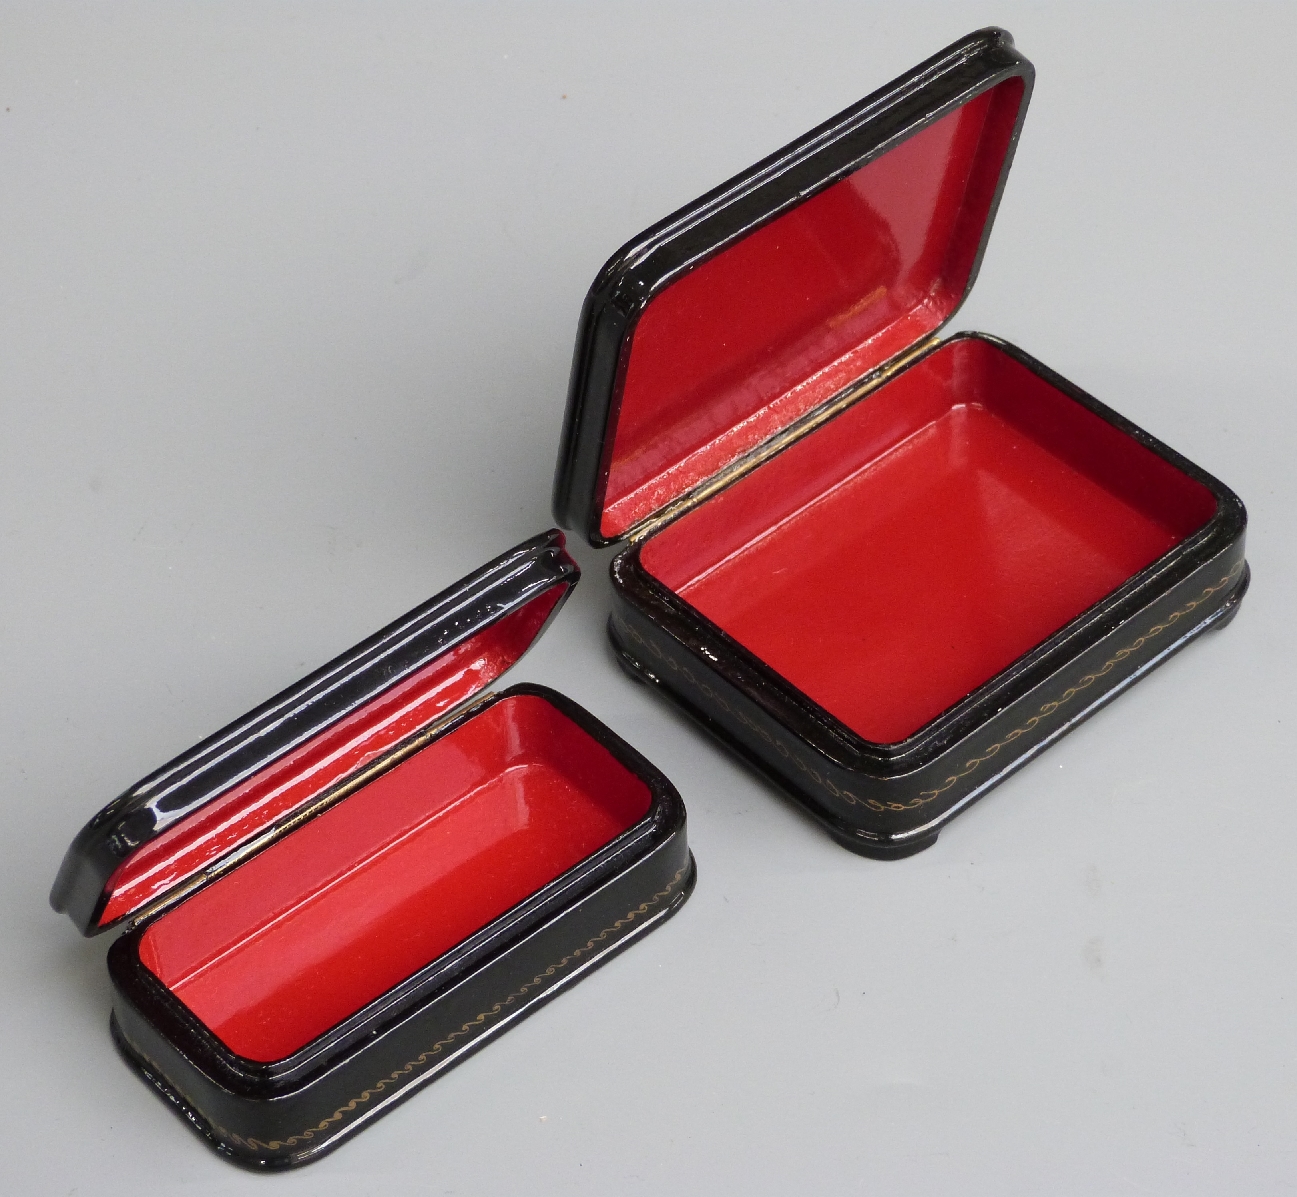 Two Russian lacquer boxes, one depicting a lady in traditional dress (approximately 5cm x 10cm x 2. - Image 4 of 4